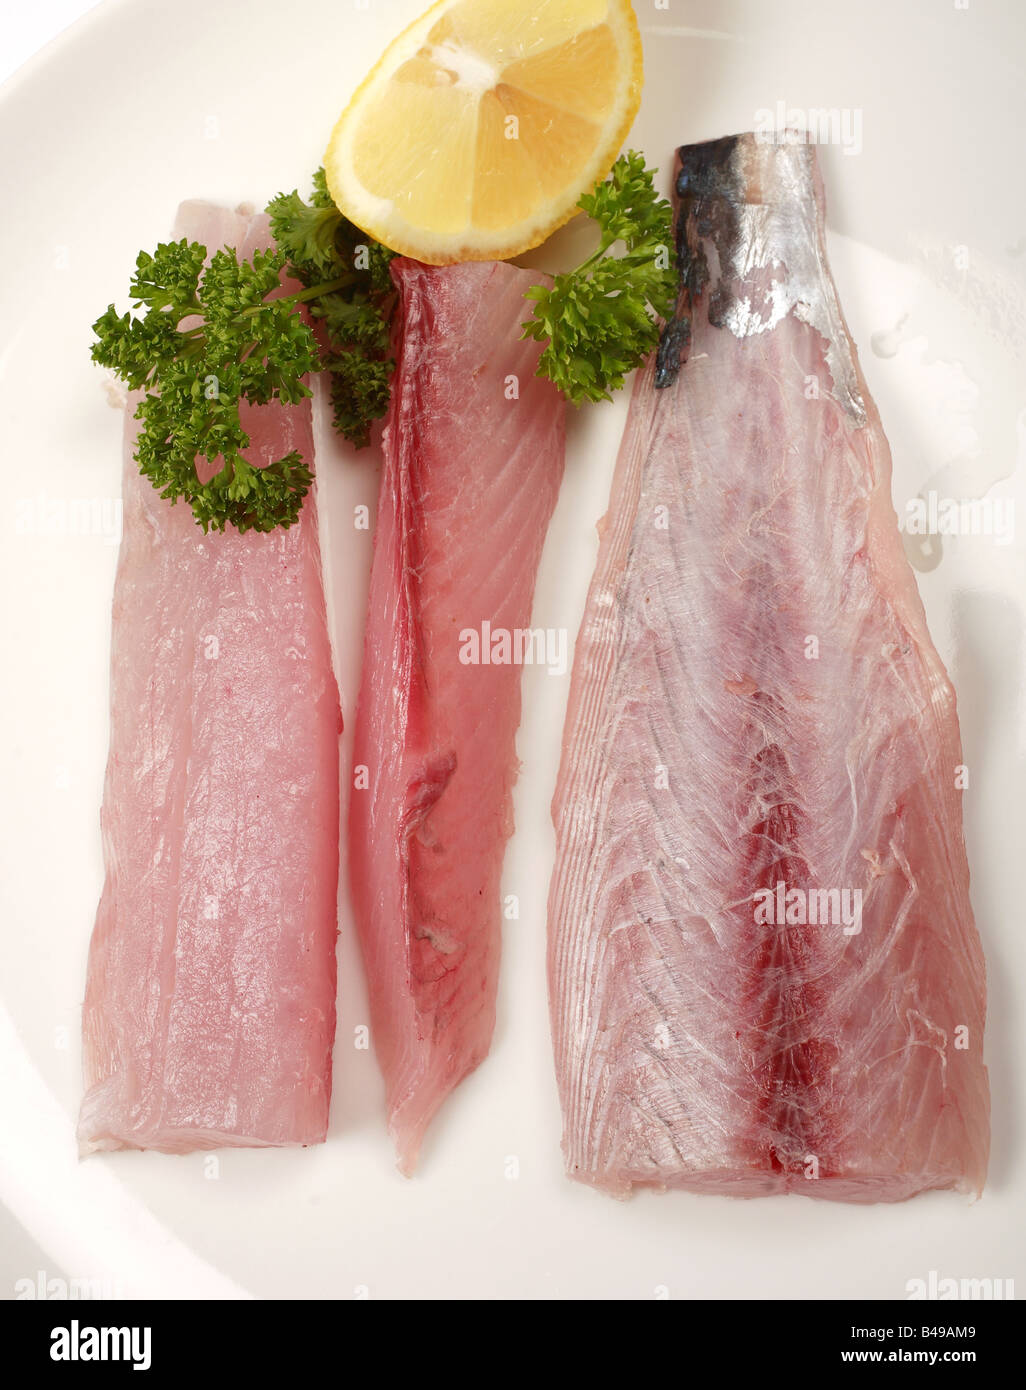 fillets of Spanish narrow barred mackerel also known as kingfish on a plate viewed from above Stock Photo